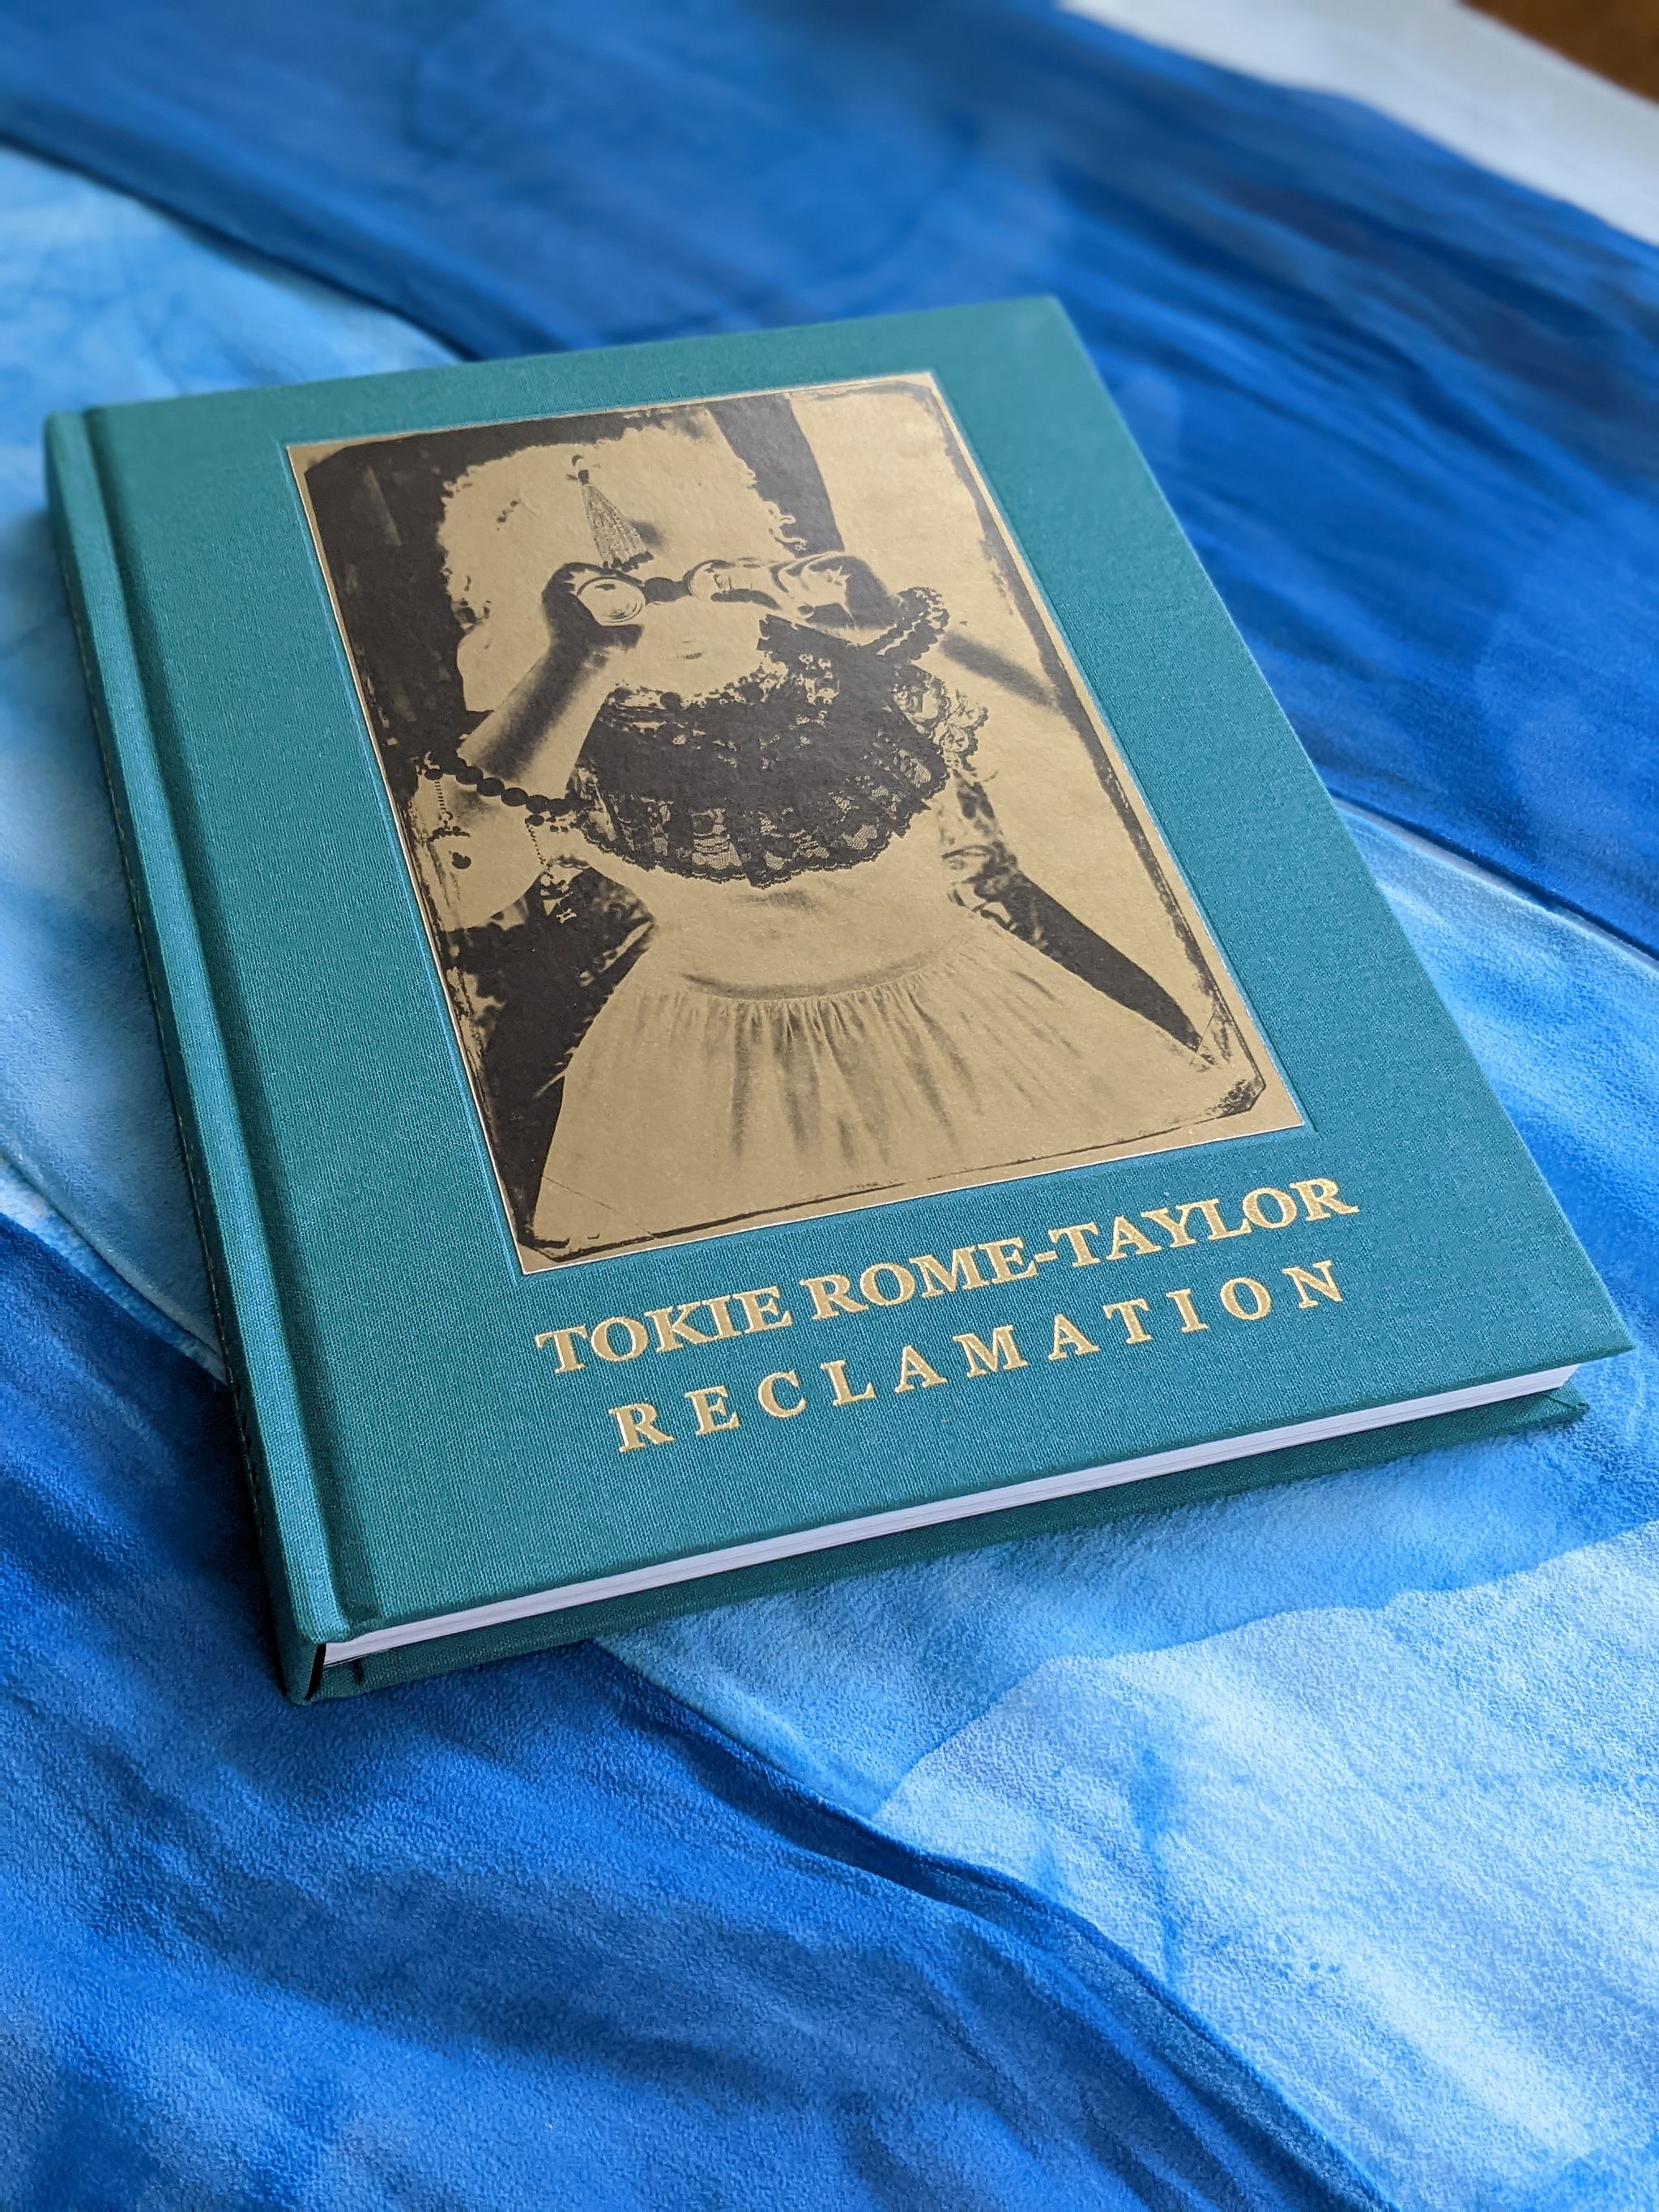 Now Available-"Reclamation", Tokie Rome-Taylor